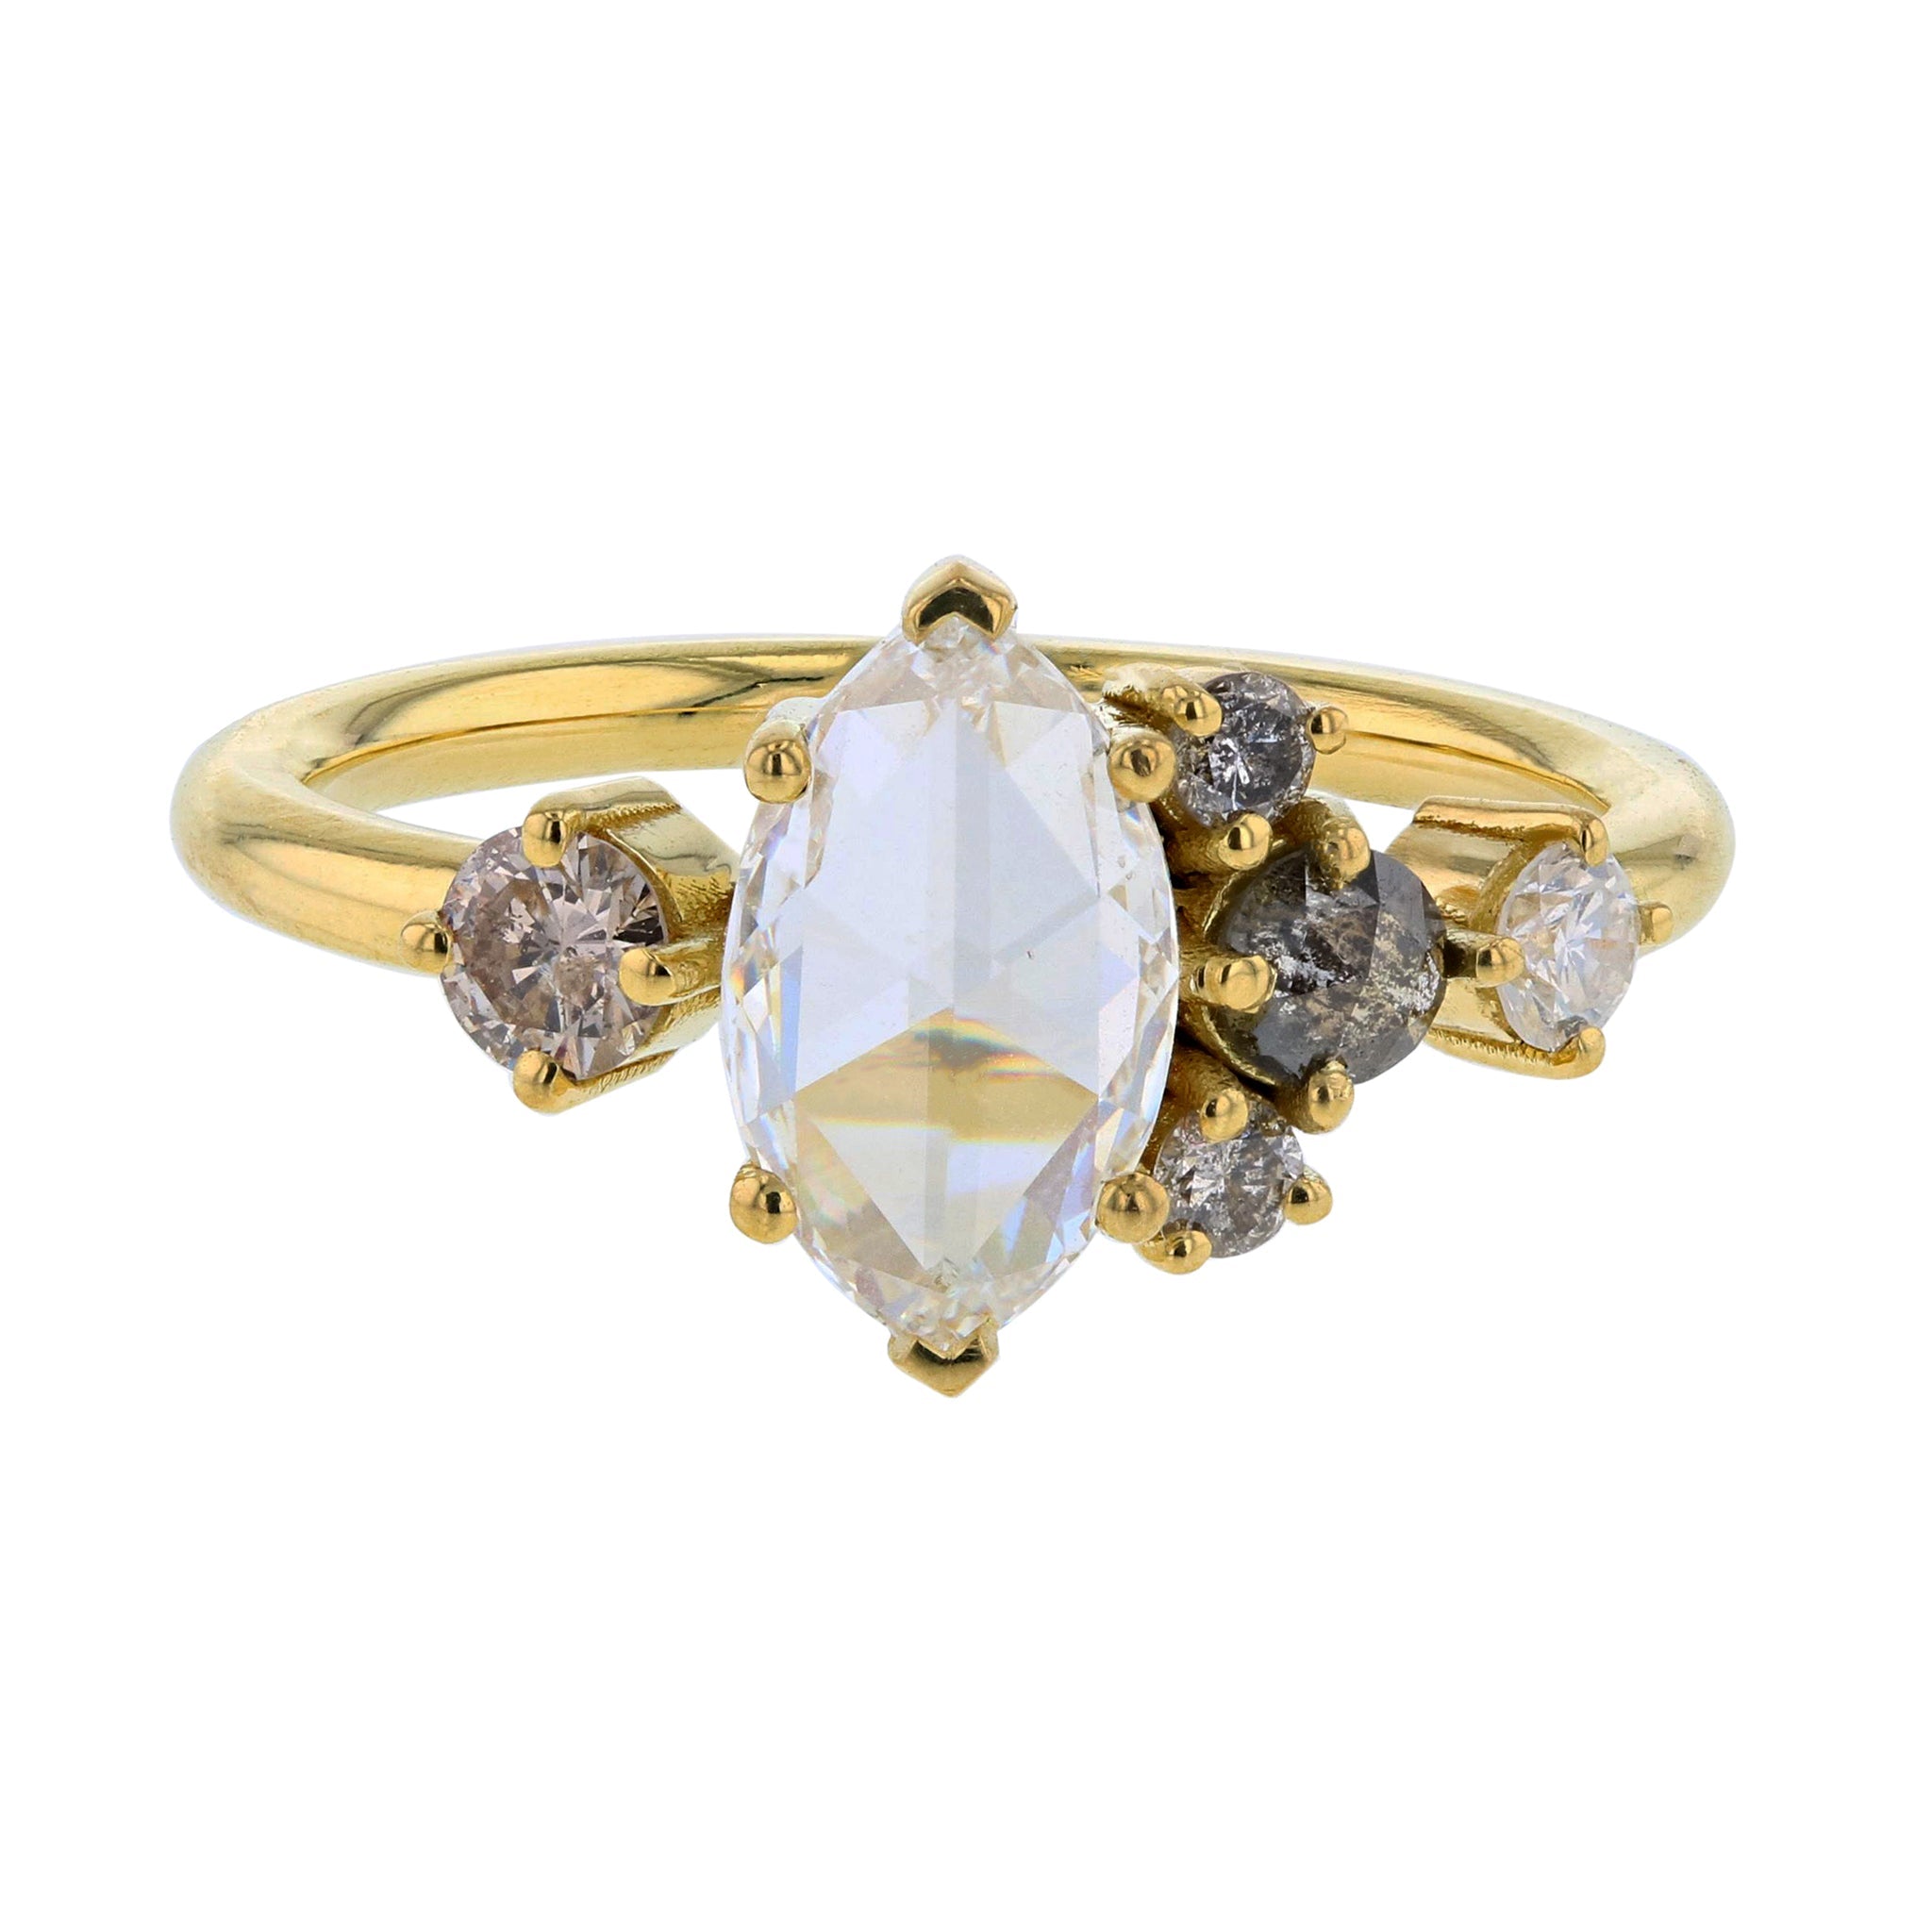 Rose Cut Marquise Diamond Engagement Ring with Salt & Pepper Side Stones